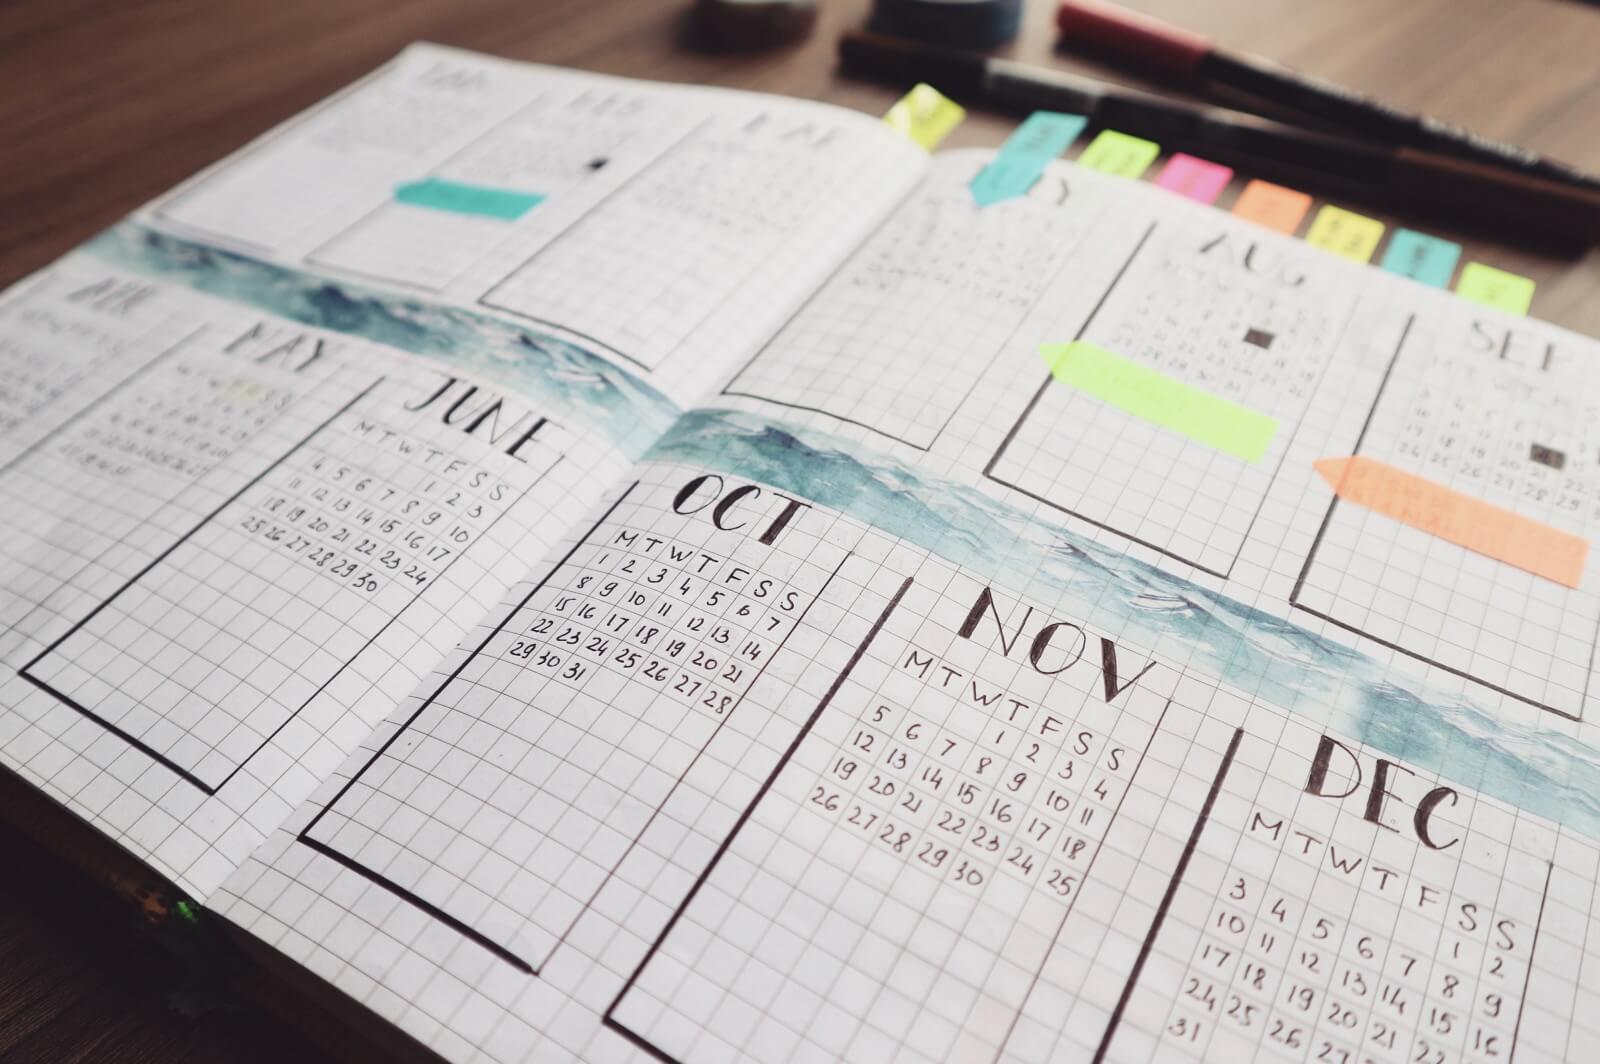 How To Prioritize In Your Bullet Journal